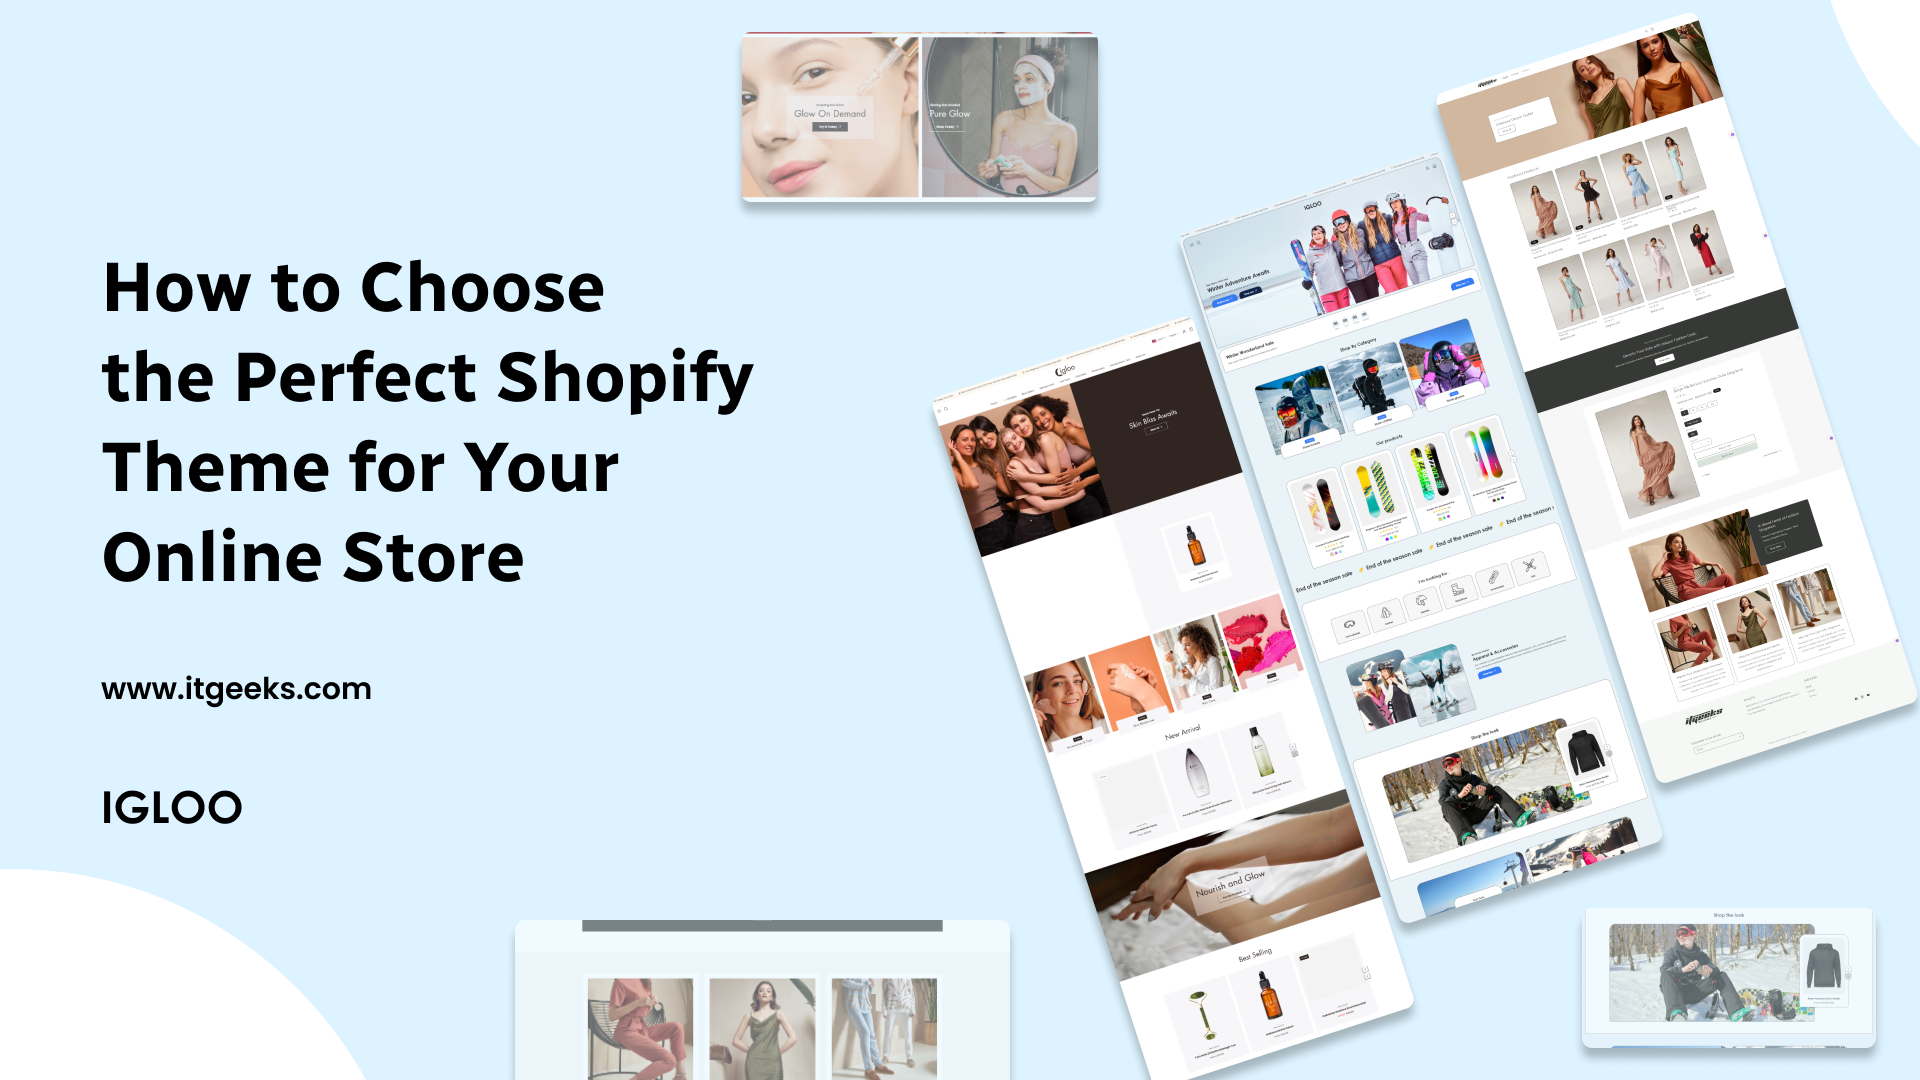 How to Choose the Perfect Shopify Theme for Your Online Store